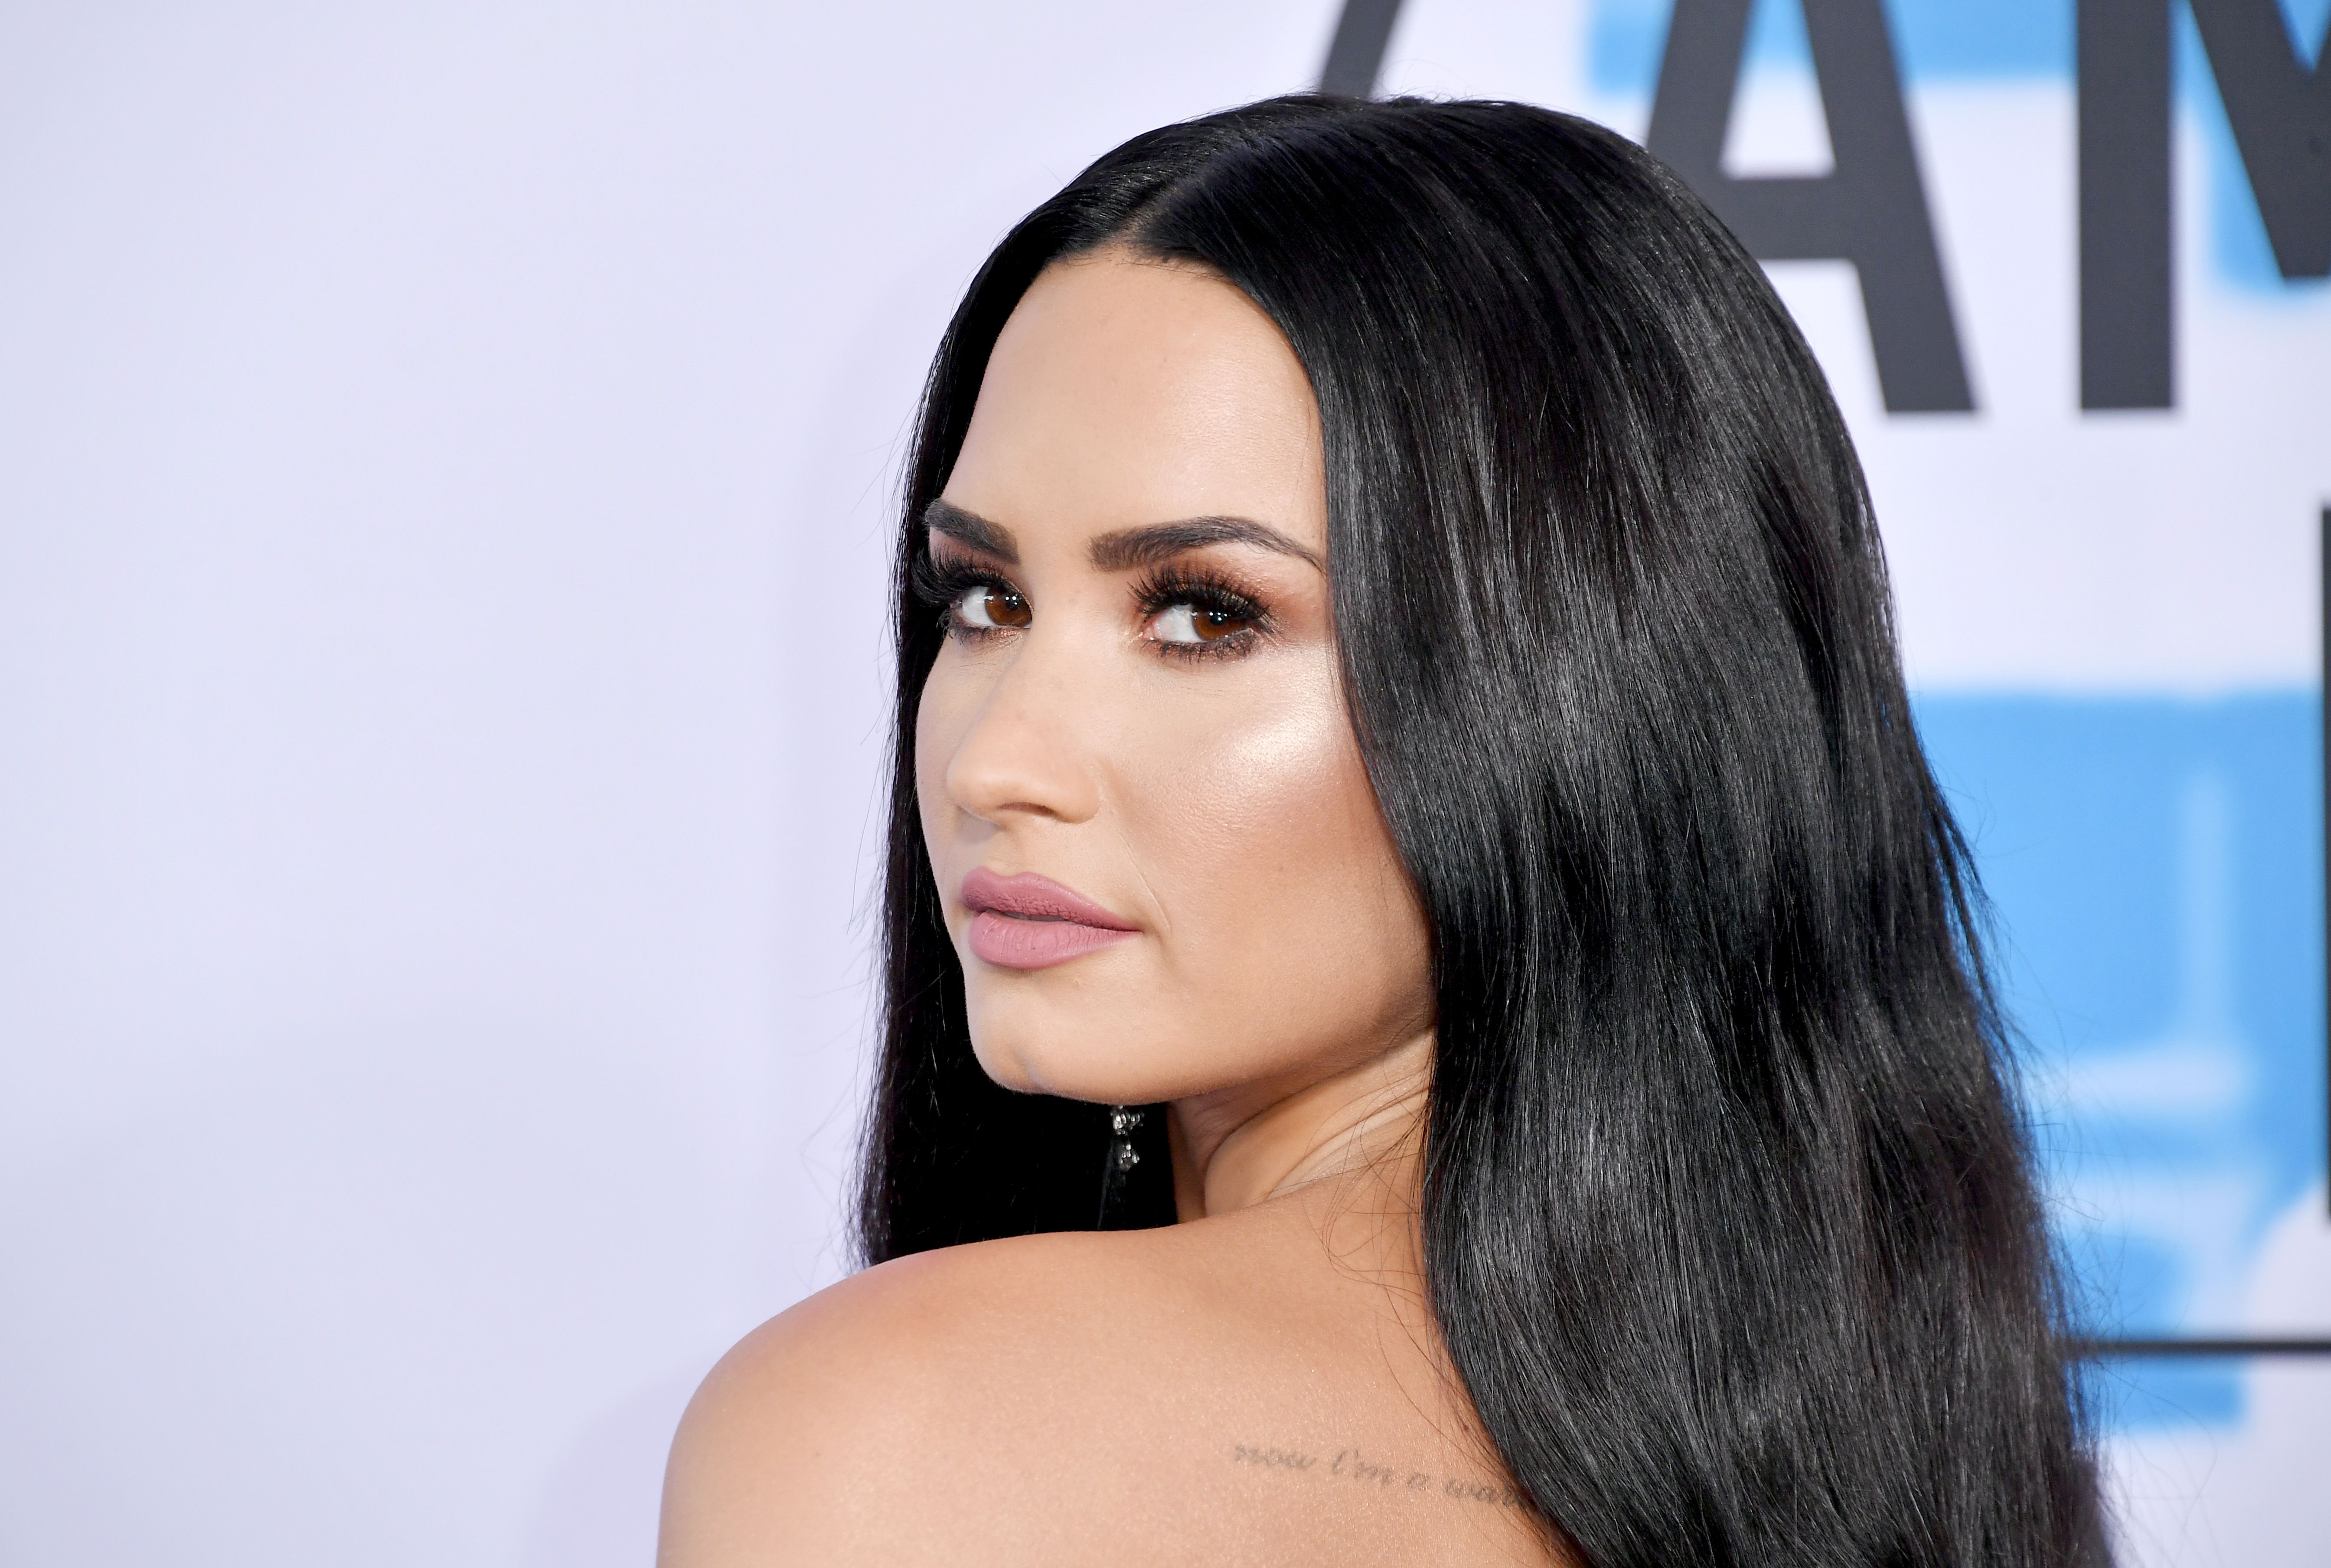 Demi Lovato Deletes Twitter After Backlash Following 21 Savage Meme